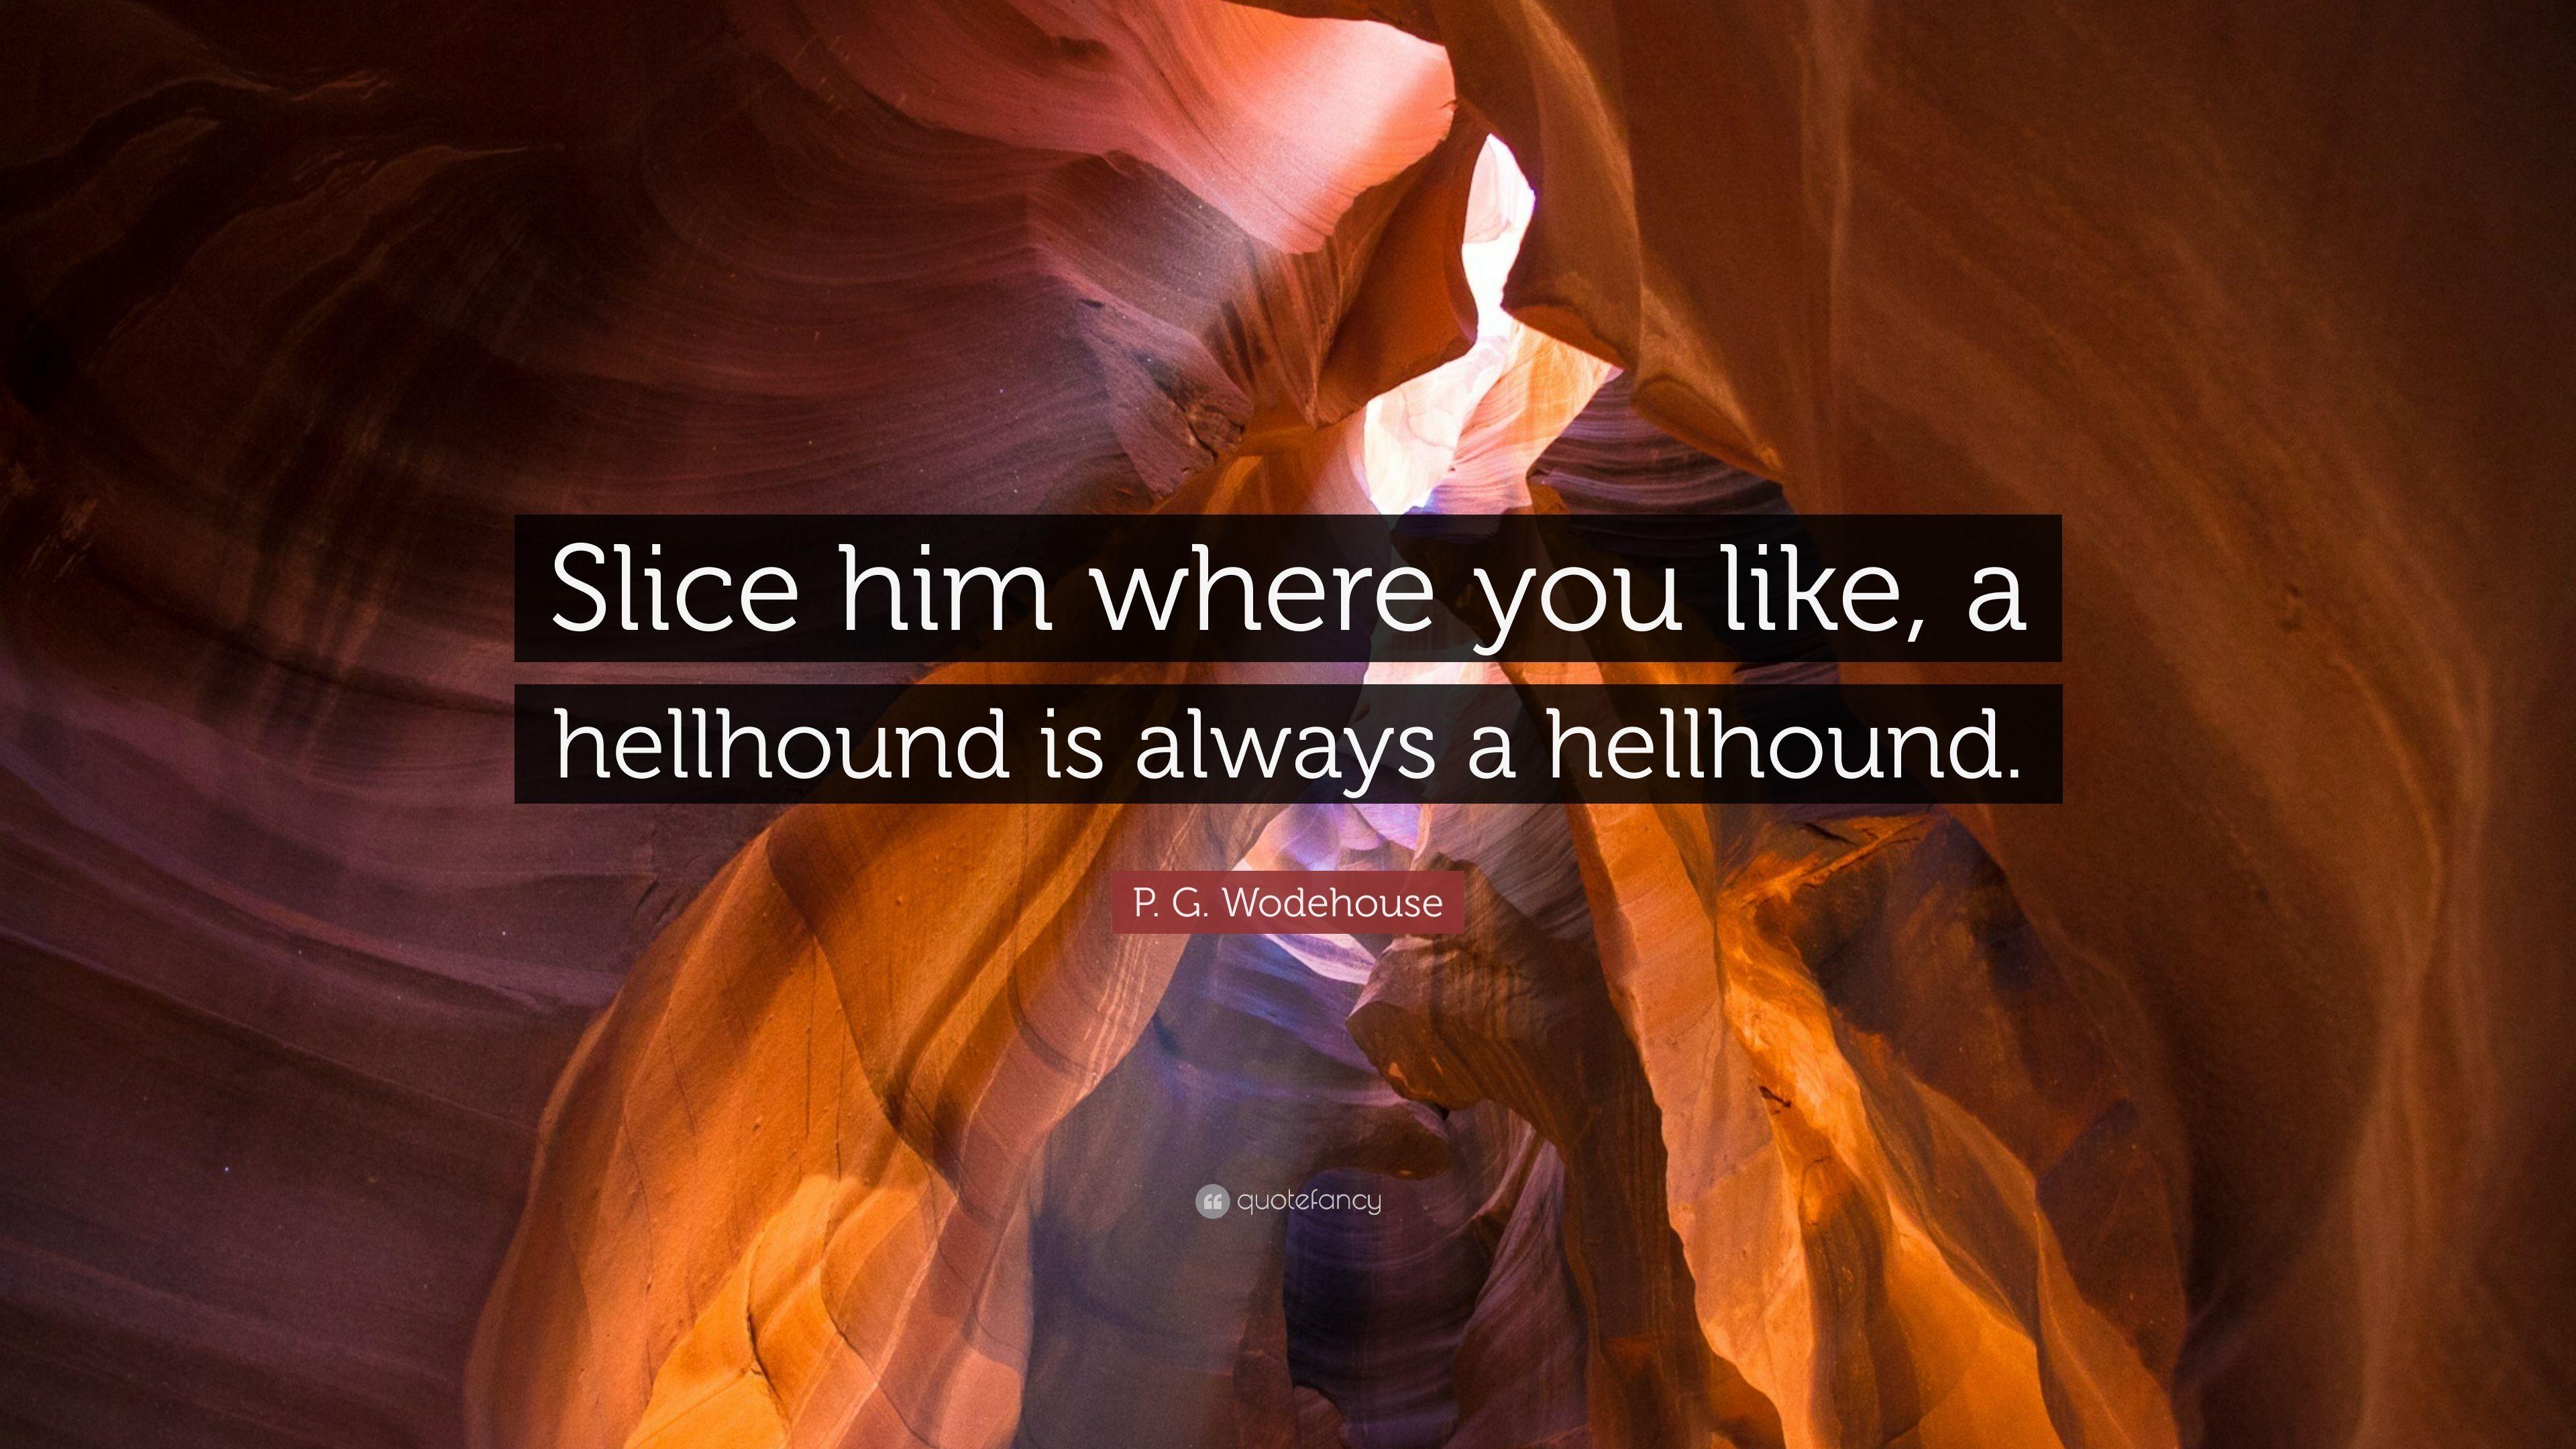 P. G. Wodehouse Quote: “Slice him where you like, a hellhound is